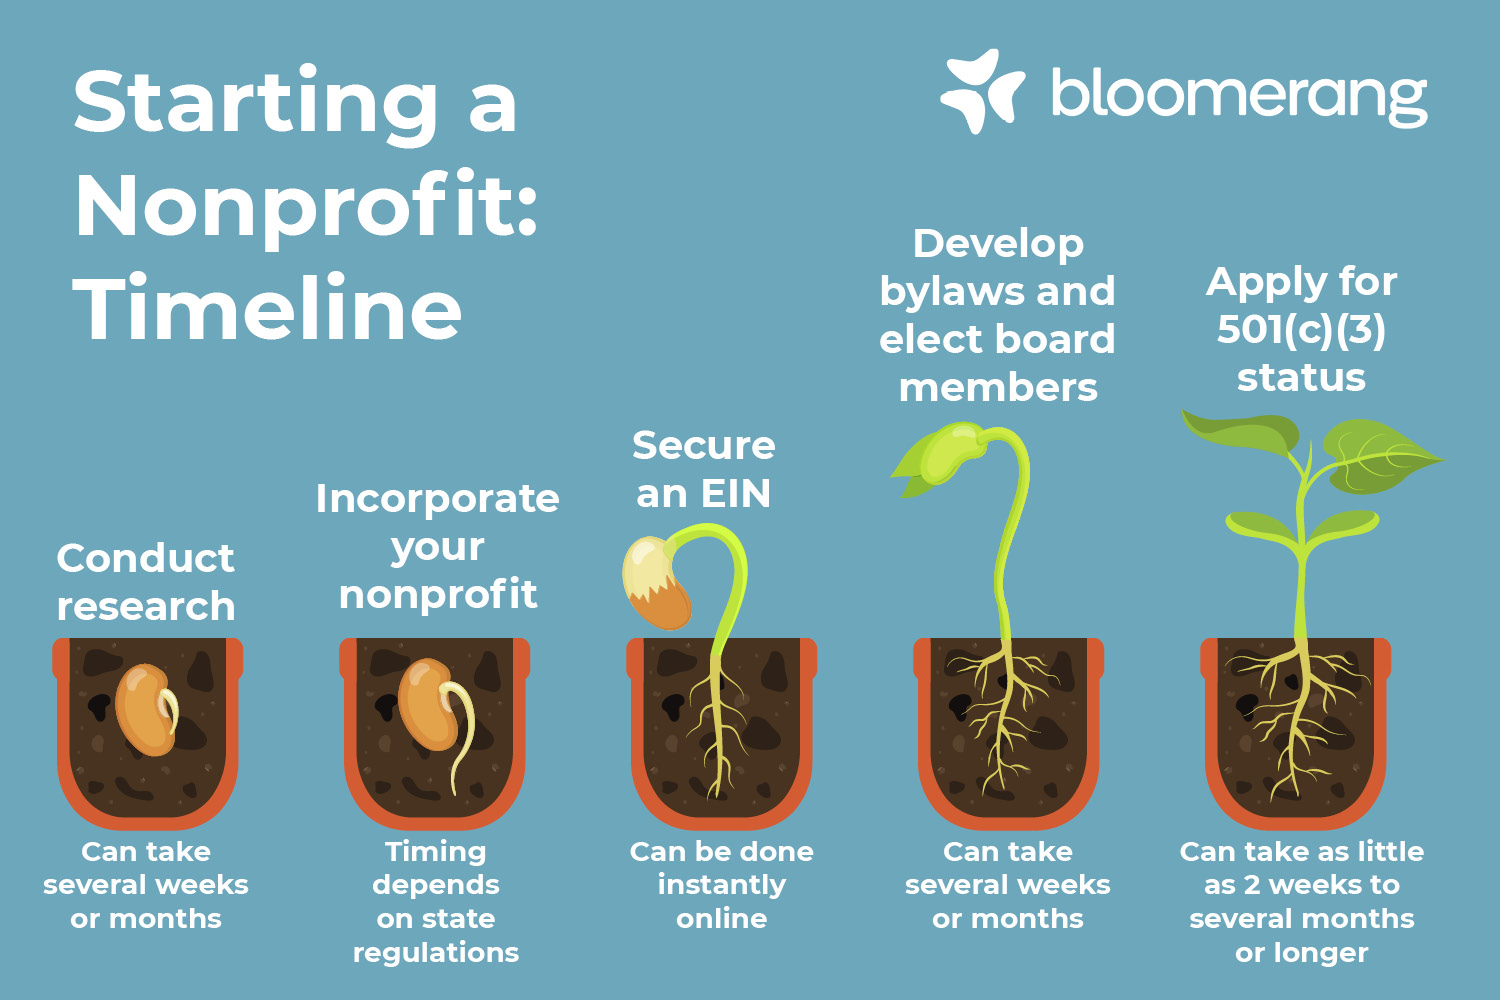 This image shows a timeline depicting the steps of how to start a nonprofit (explained in the bulleted list below).